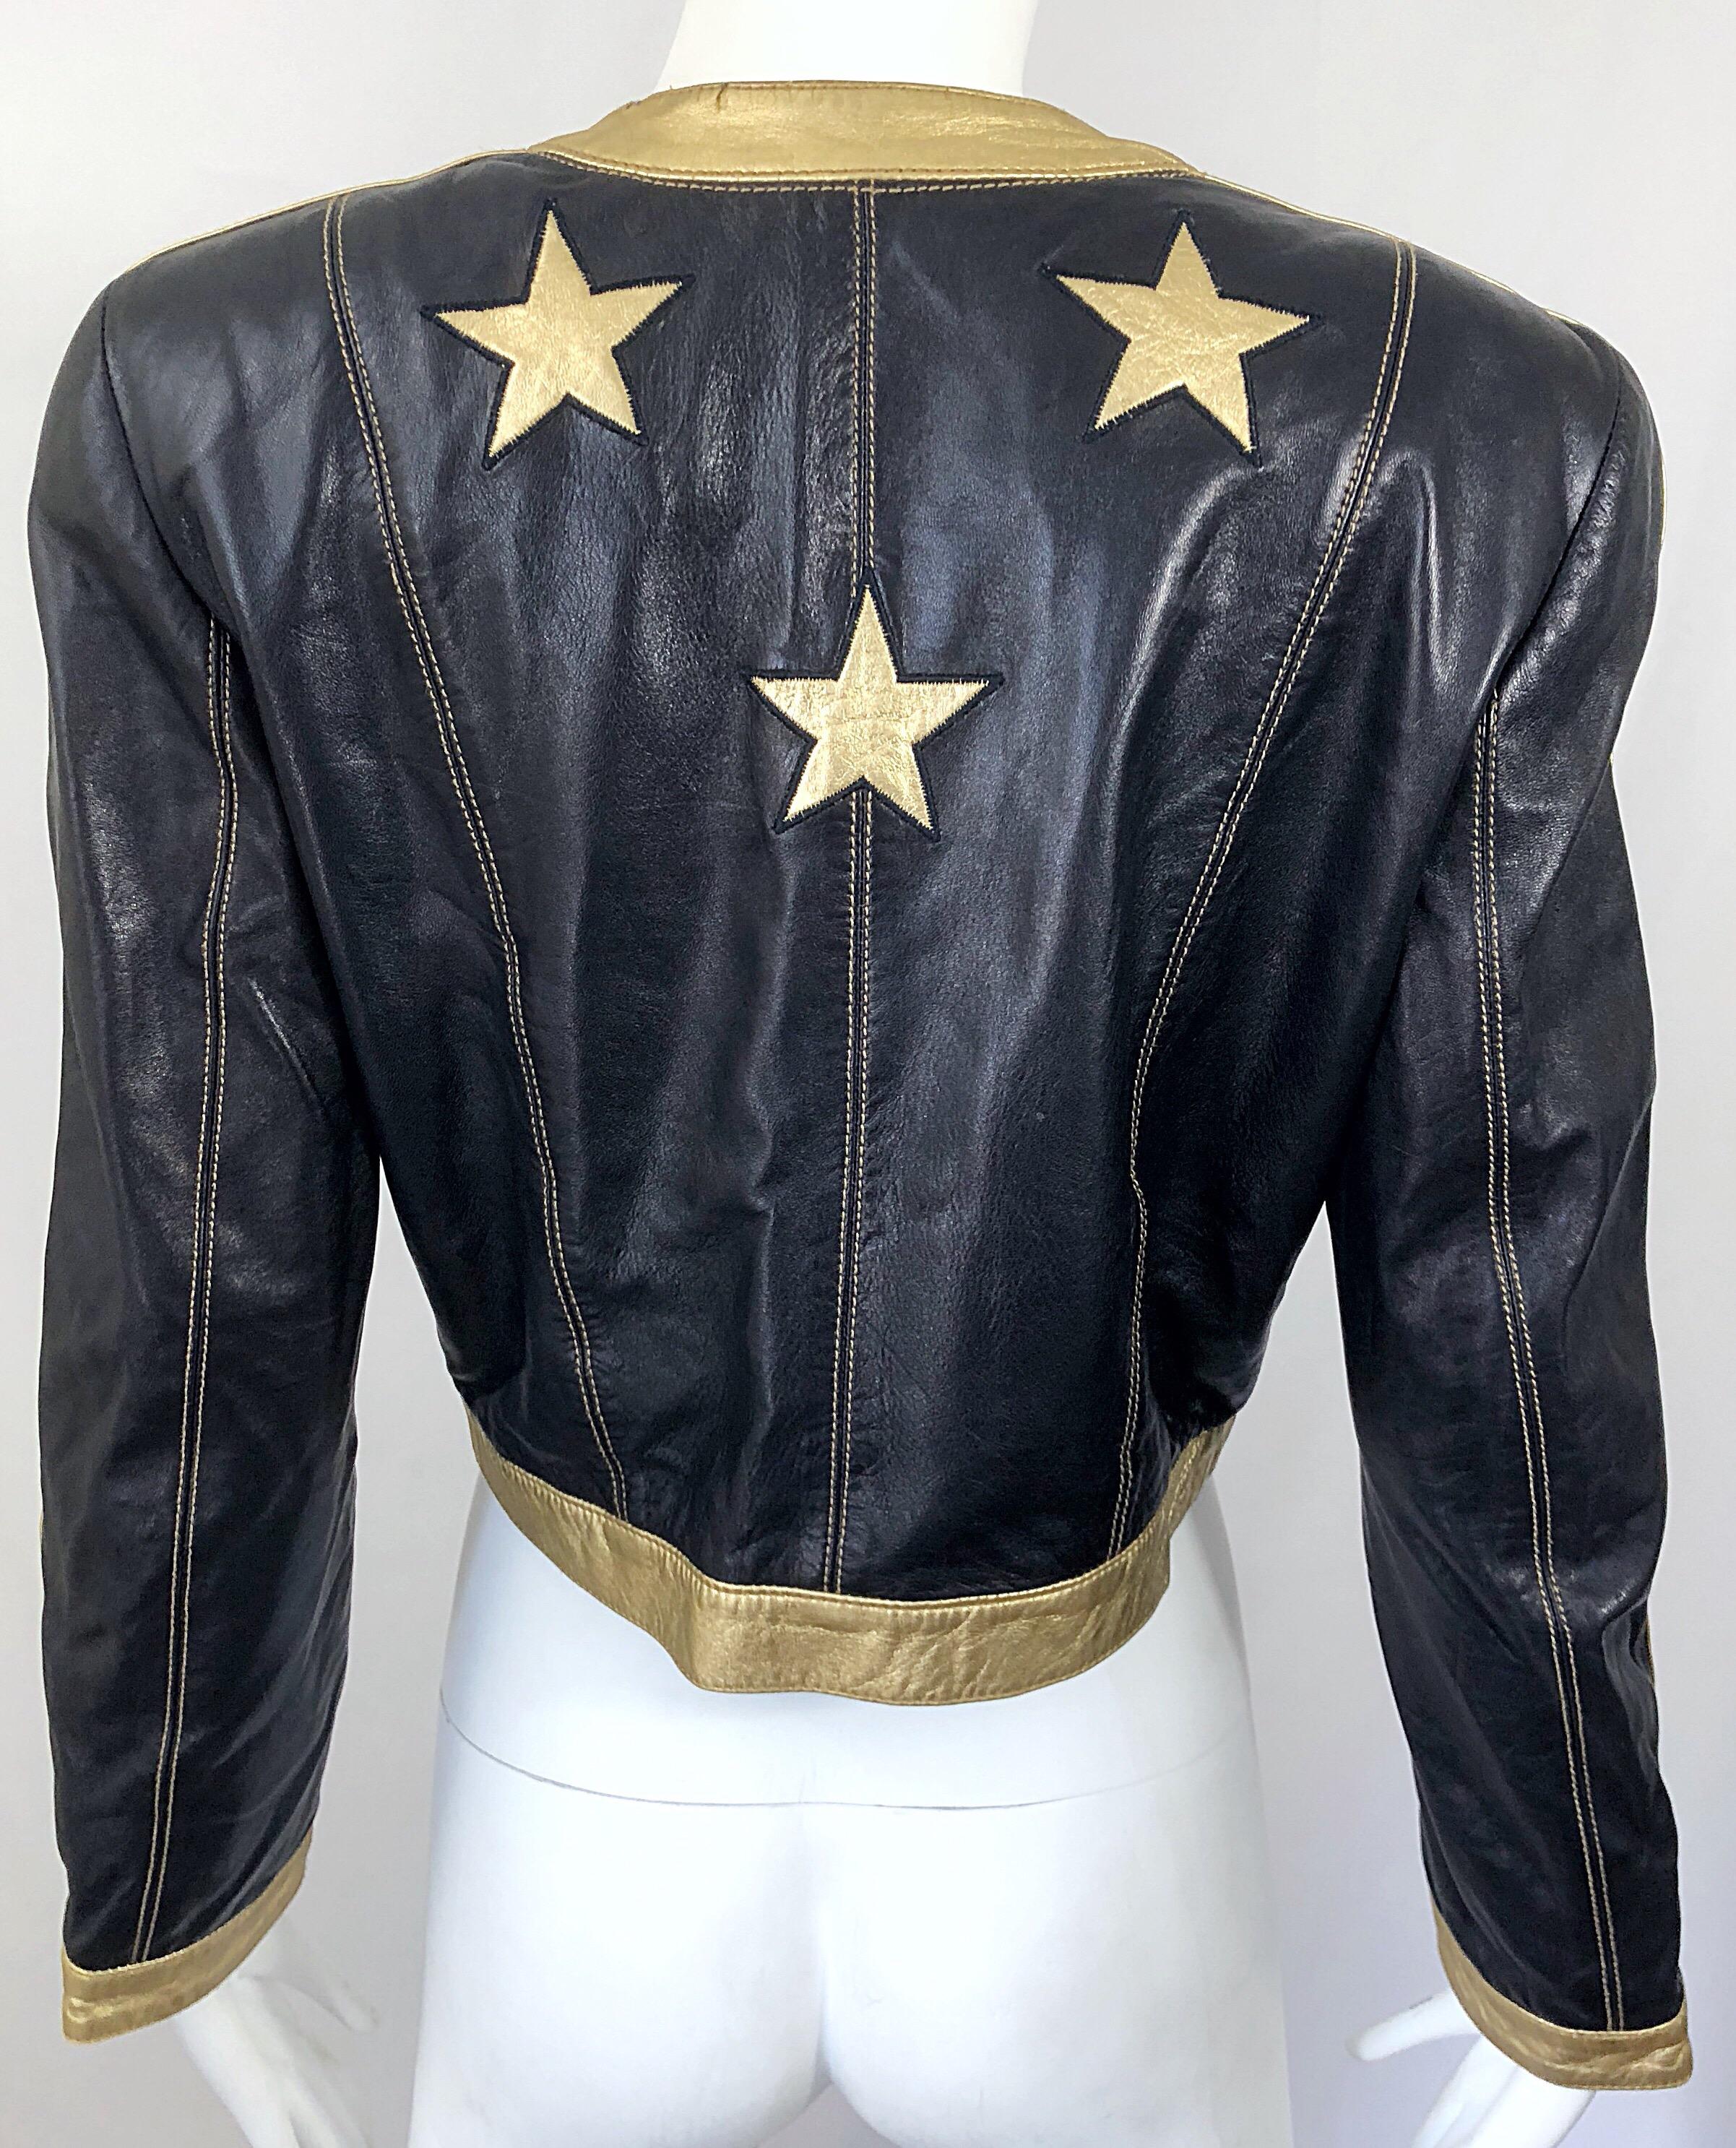 Documented Escada 1990s Black + Gold Leather Stars Vintage 90s Cropped Jacket 5